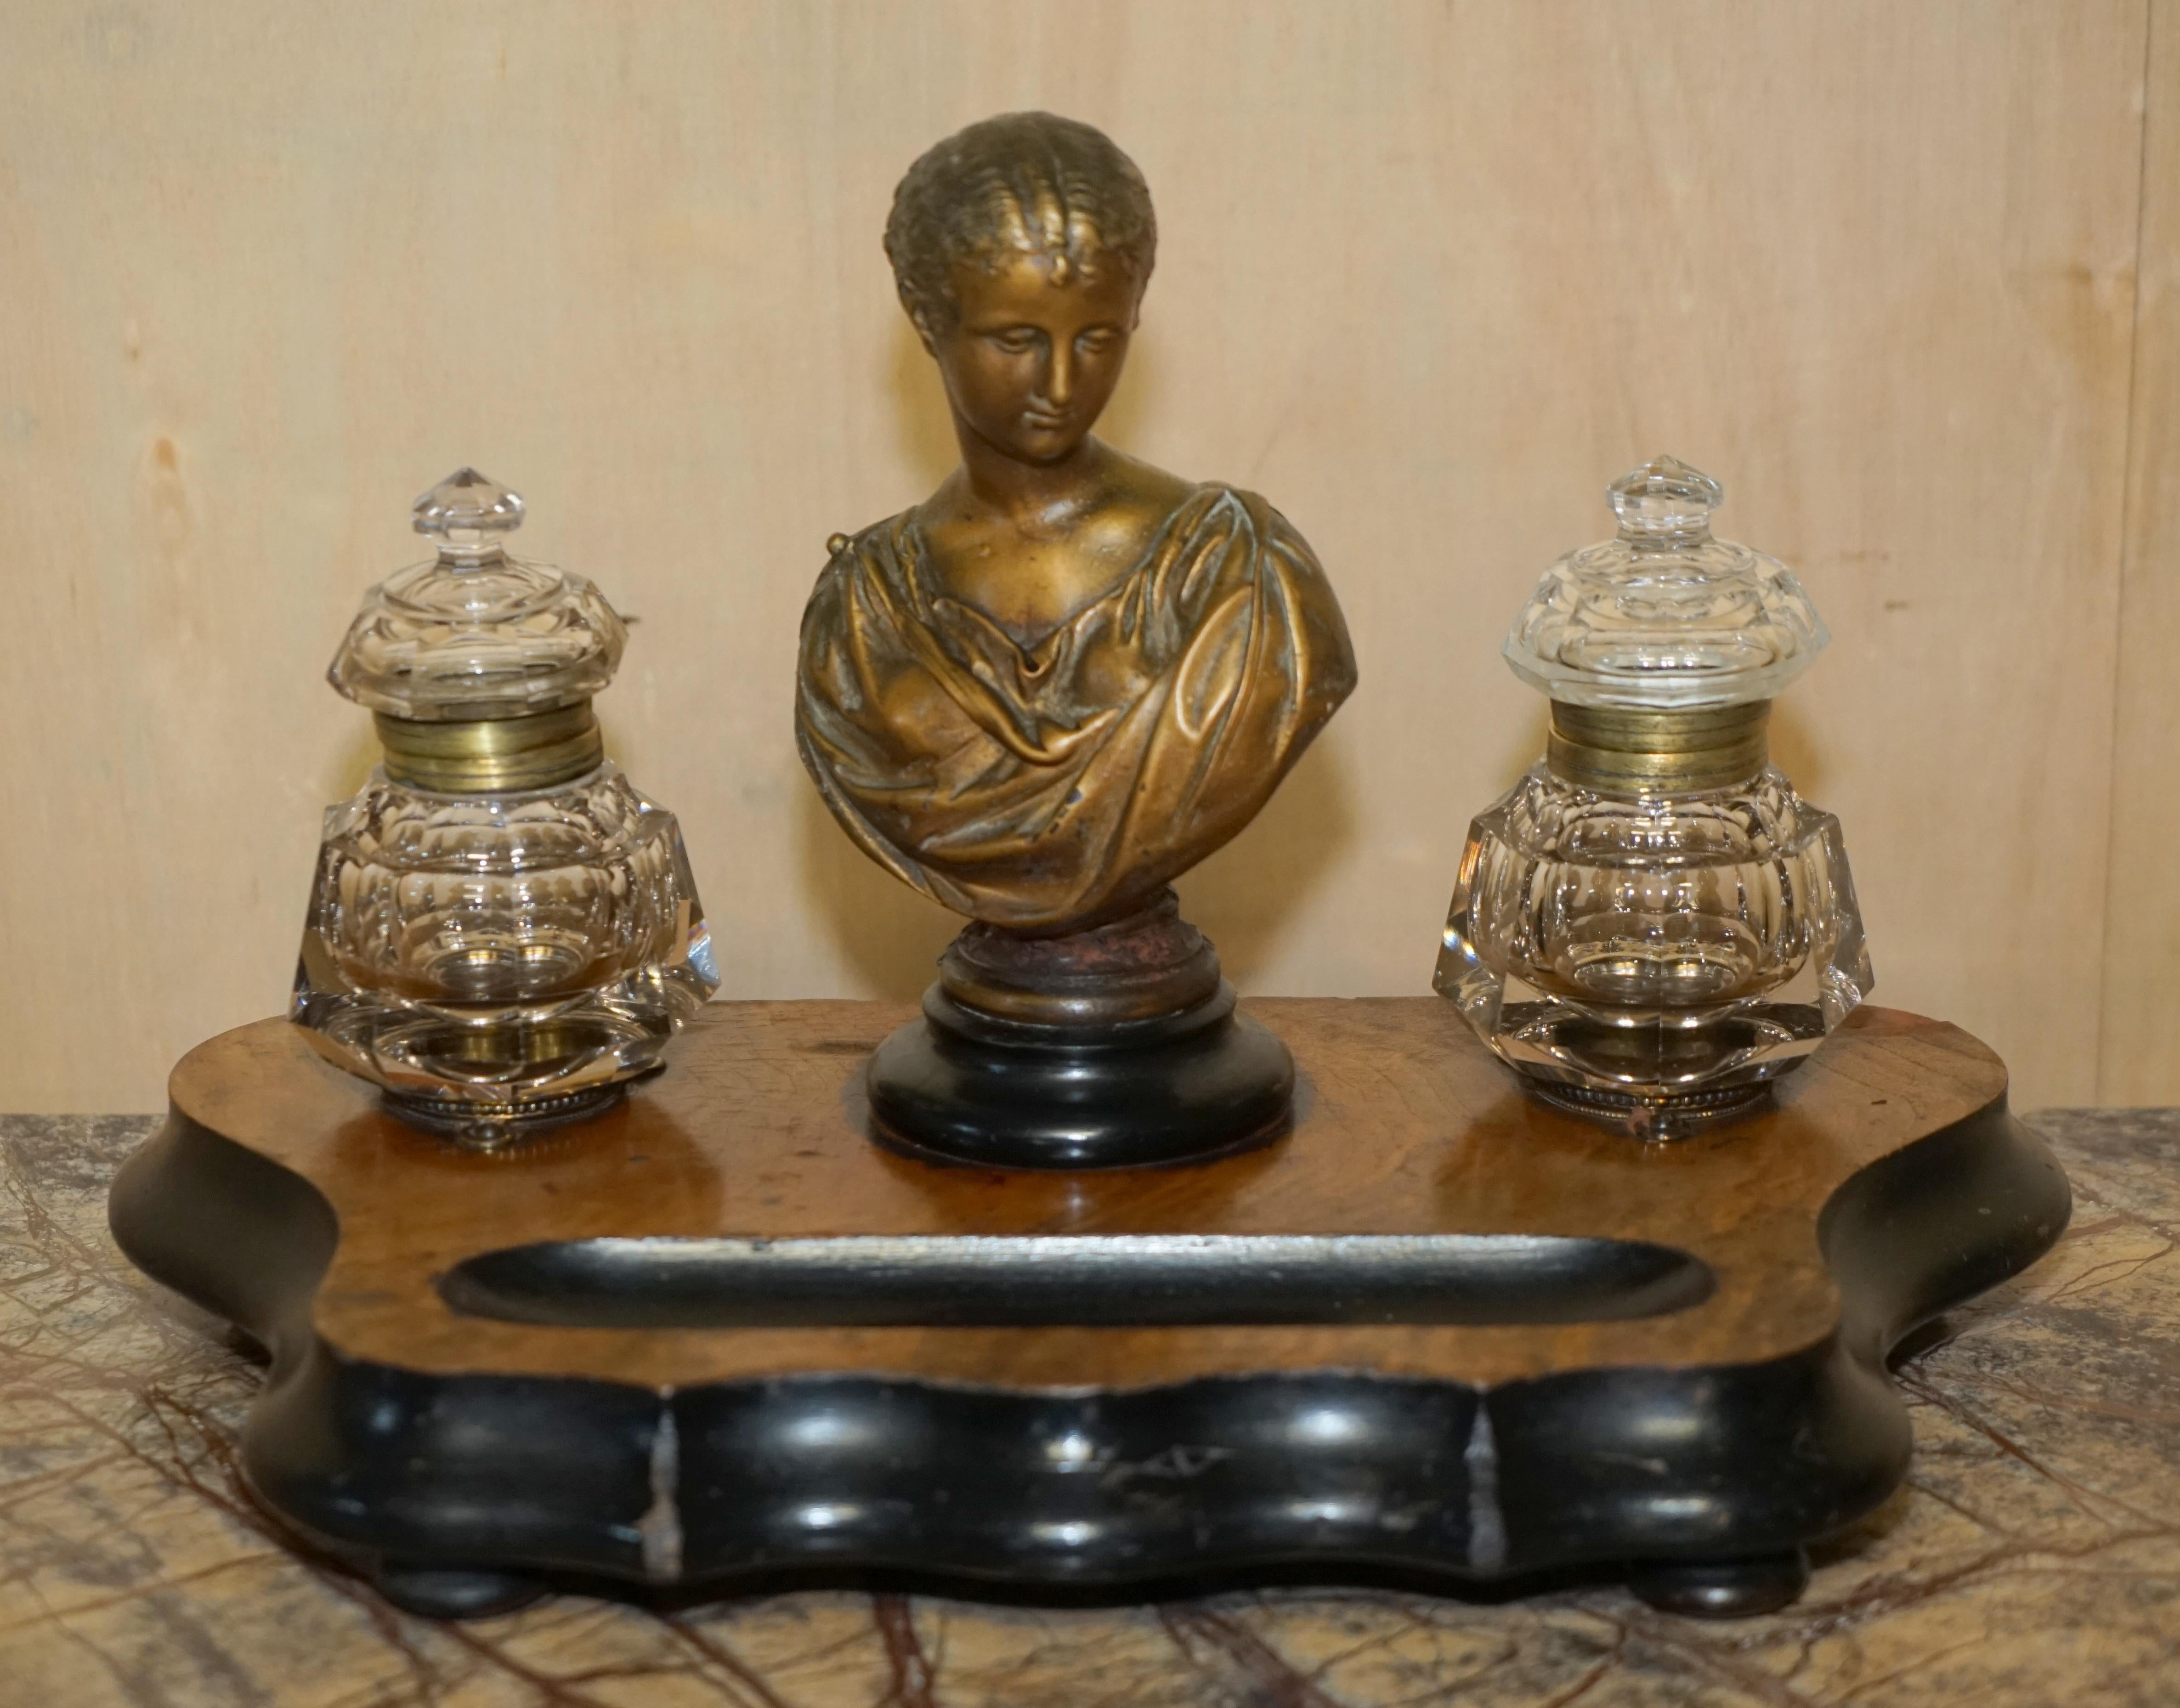 Royal House Antiques

Royal House Antiques is delighted to offer for sale this lovely 19th century French bronze ink well stand

A good looking well made and decorative desk top ink well pair on stand with French bronze statue

The condition